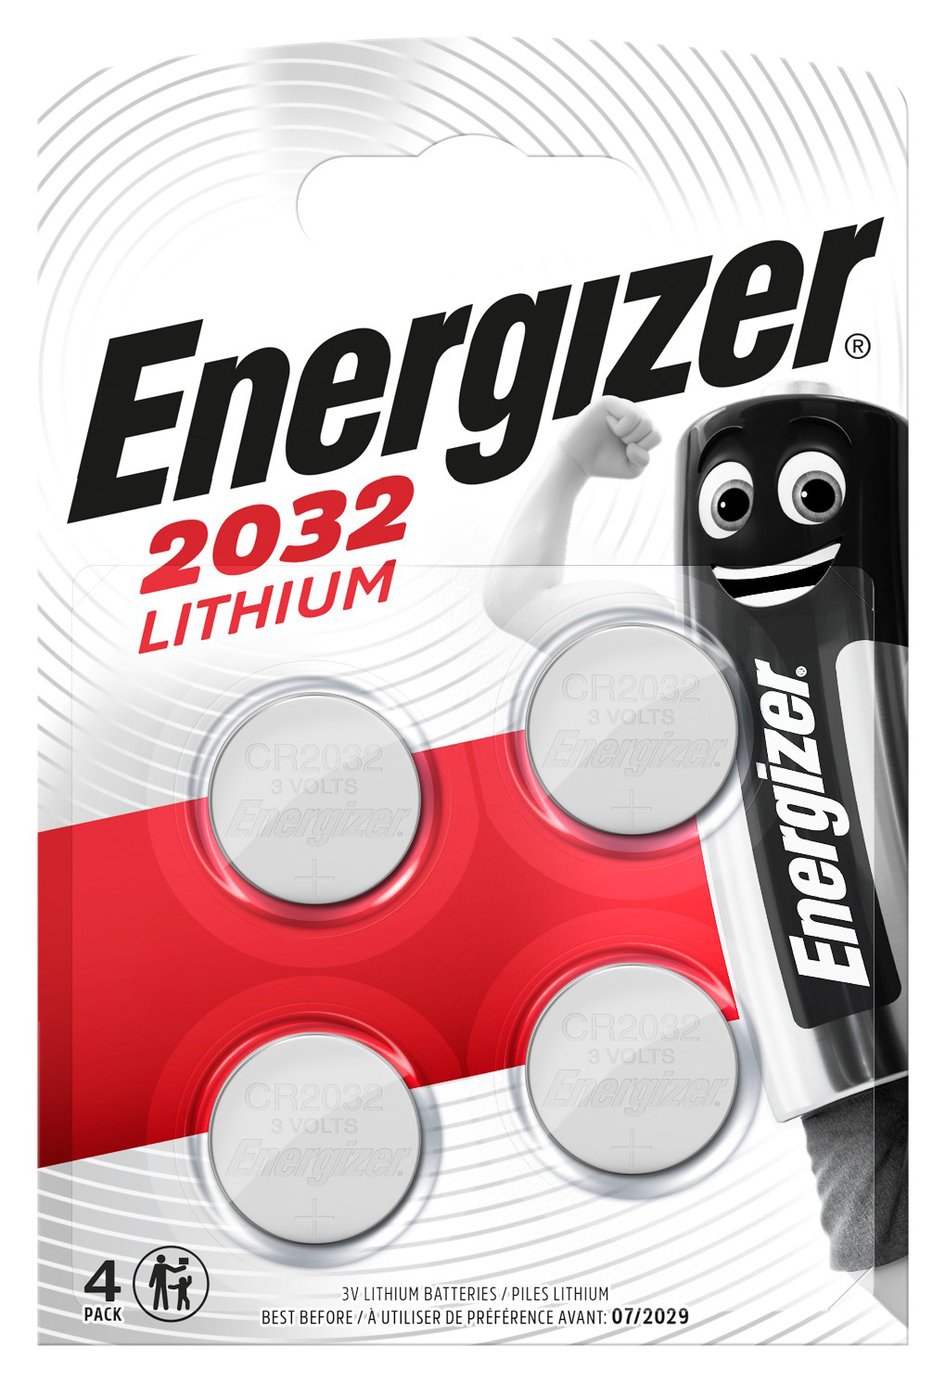 Energizer 2032 Lithium Coin Batteries Review